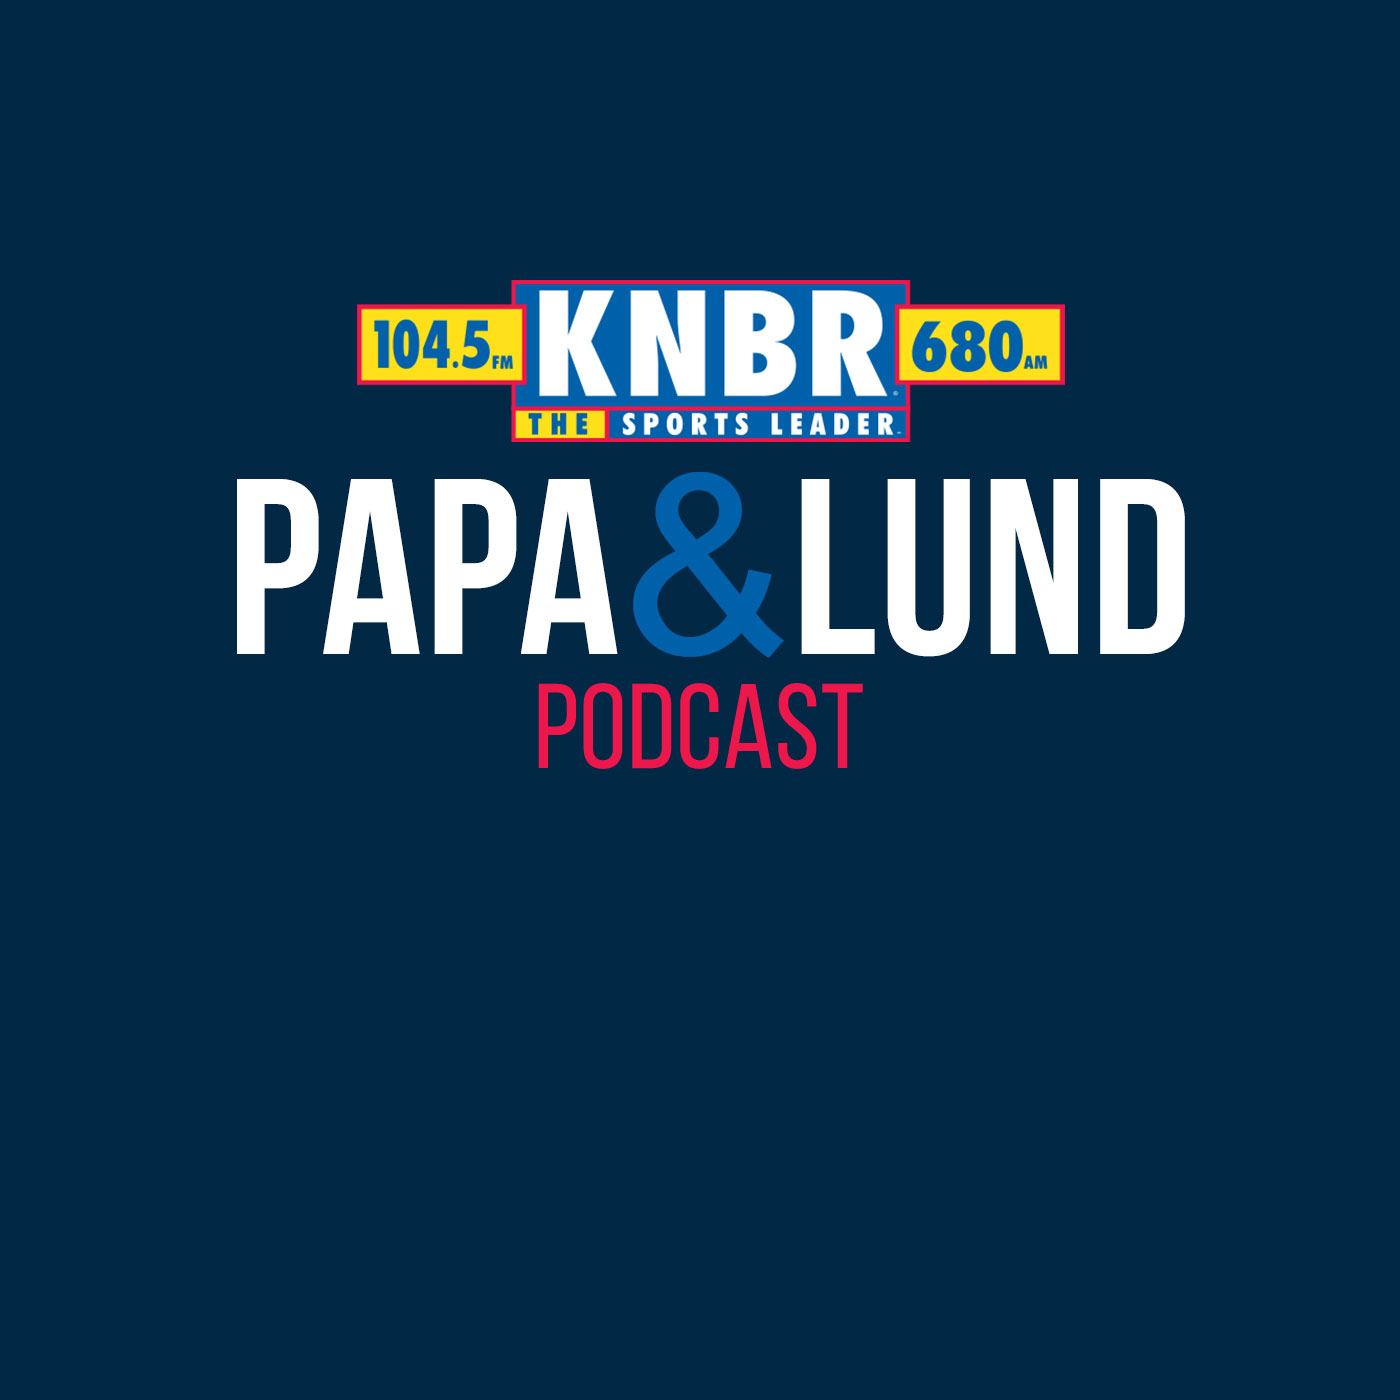 2-2 Tim Ryan joins Papa & Lund to discuss a memorable season for the 49ers and what the 49ers need to do to get over the hump and get their 6th Lombardi